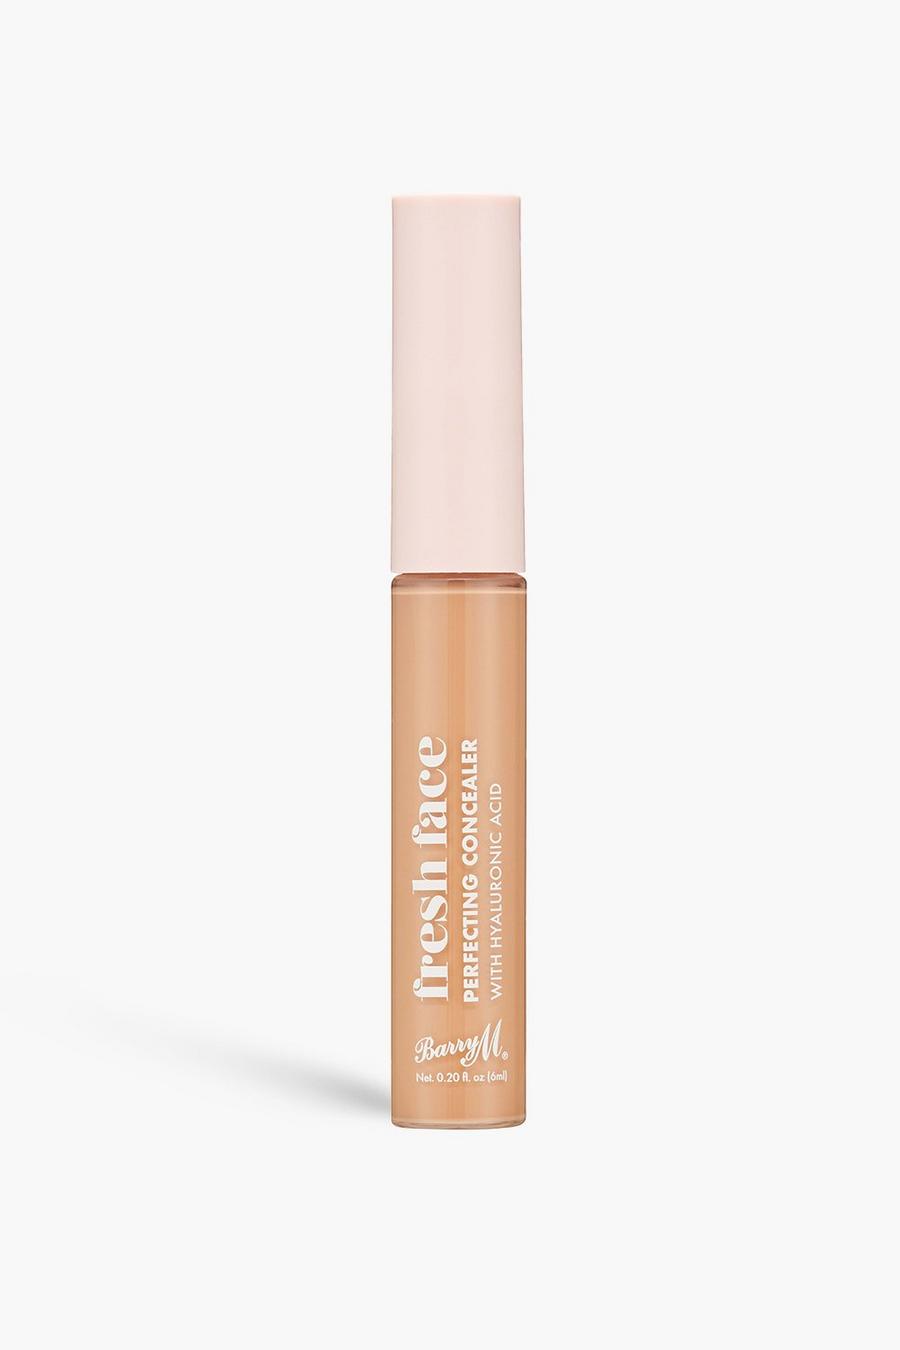 Barry M - Correttore Fresh Face Perfecting Concealer 5, Tan marrón